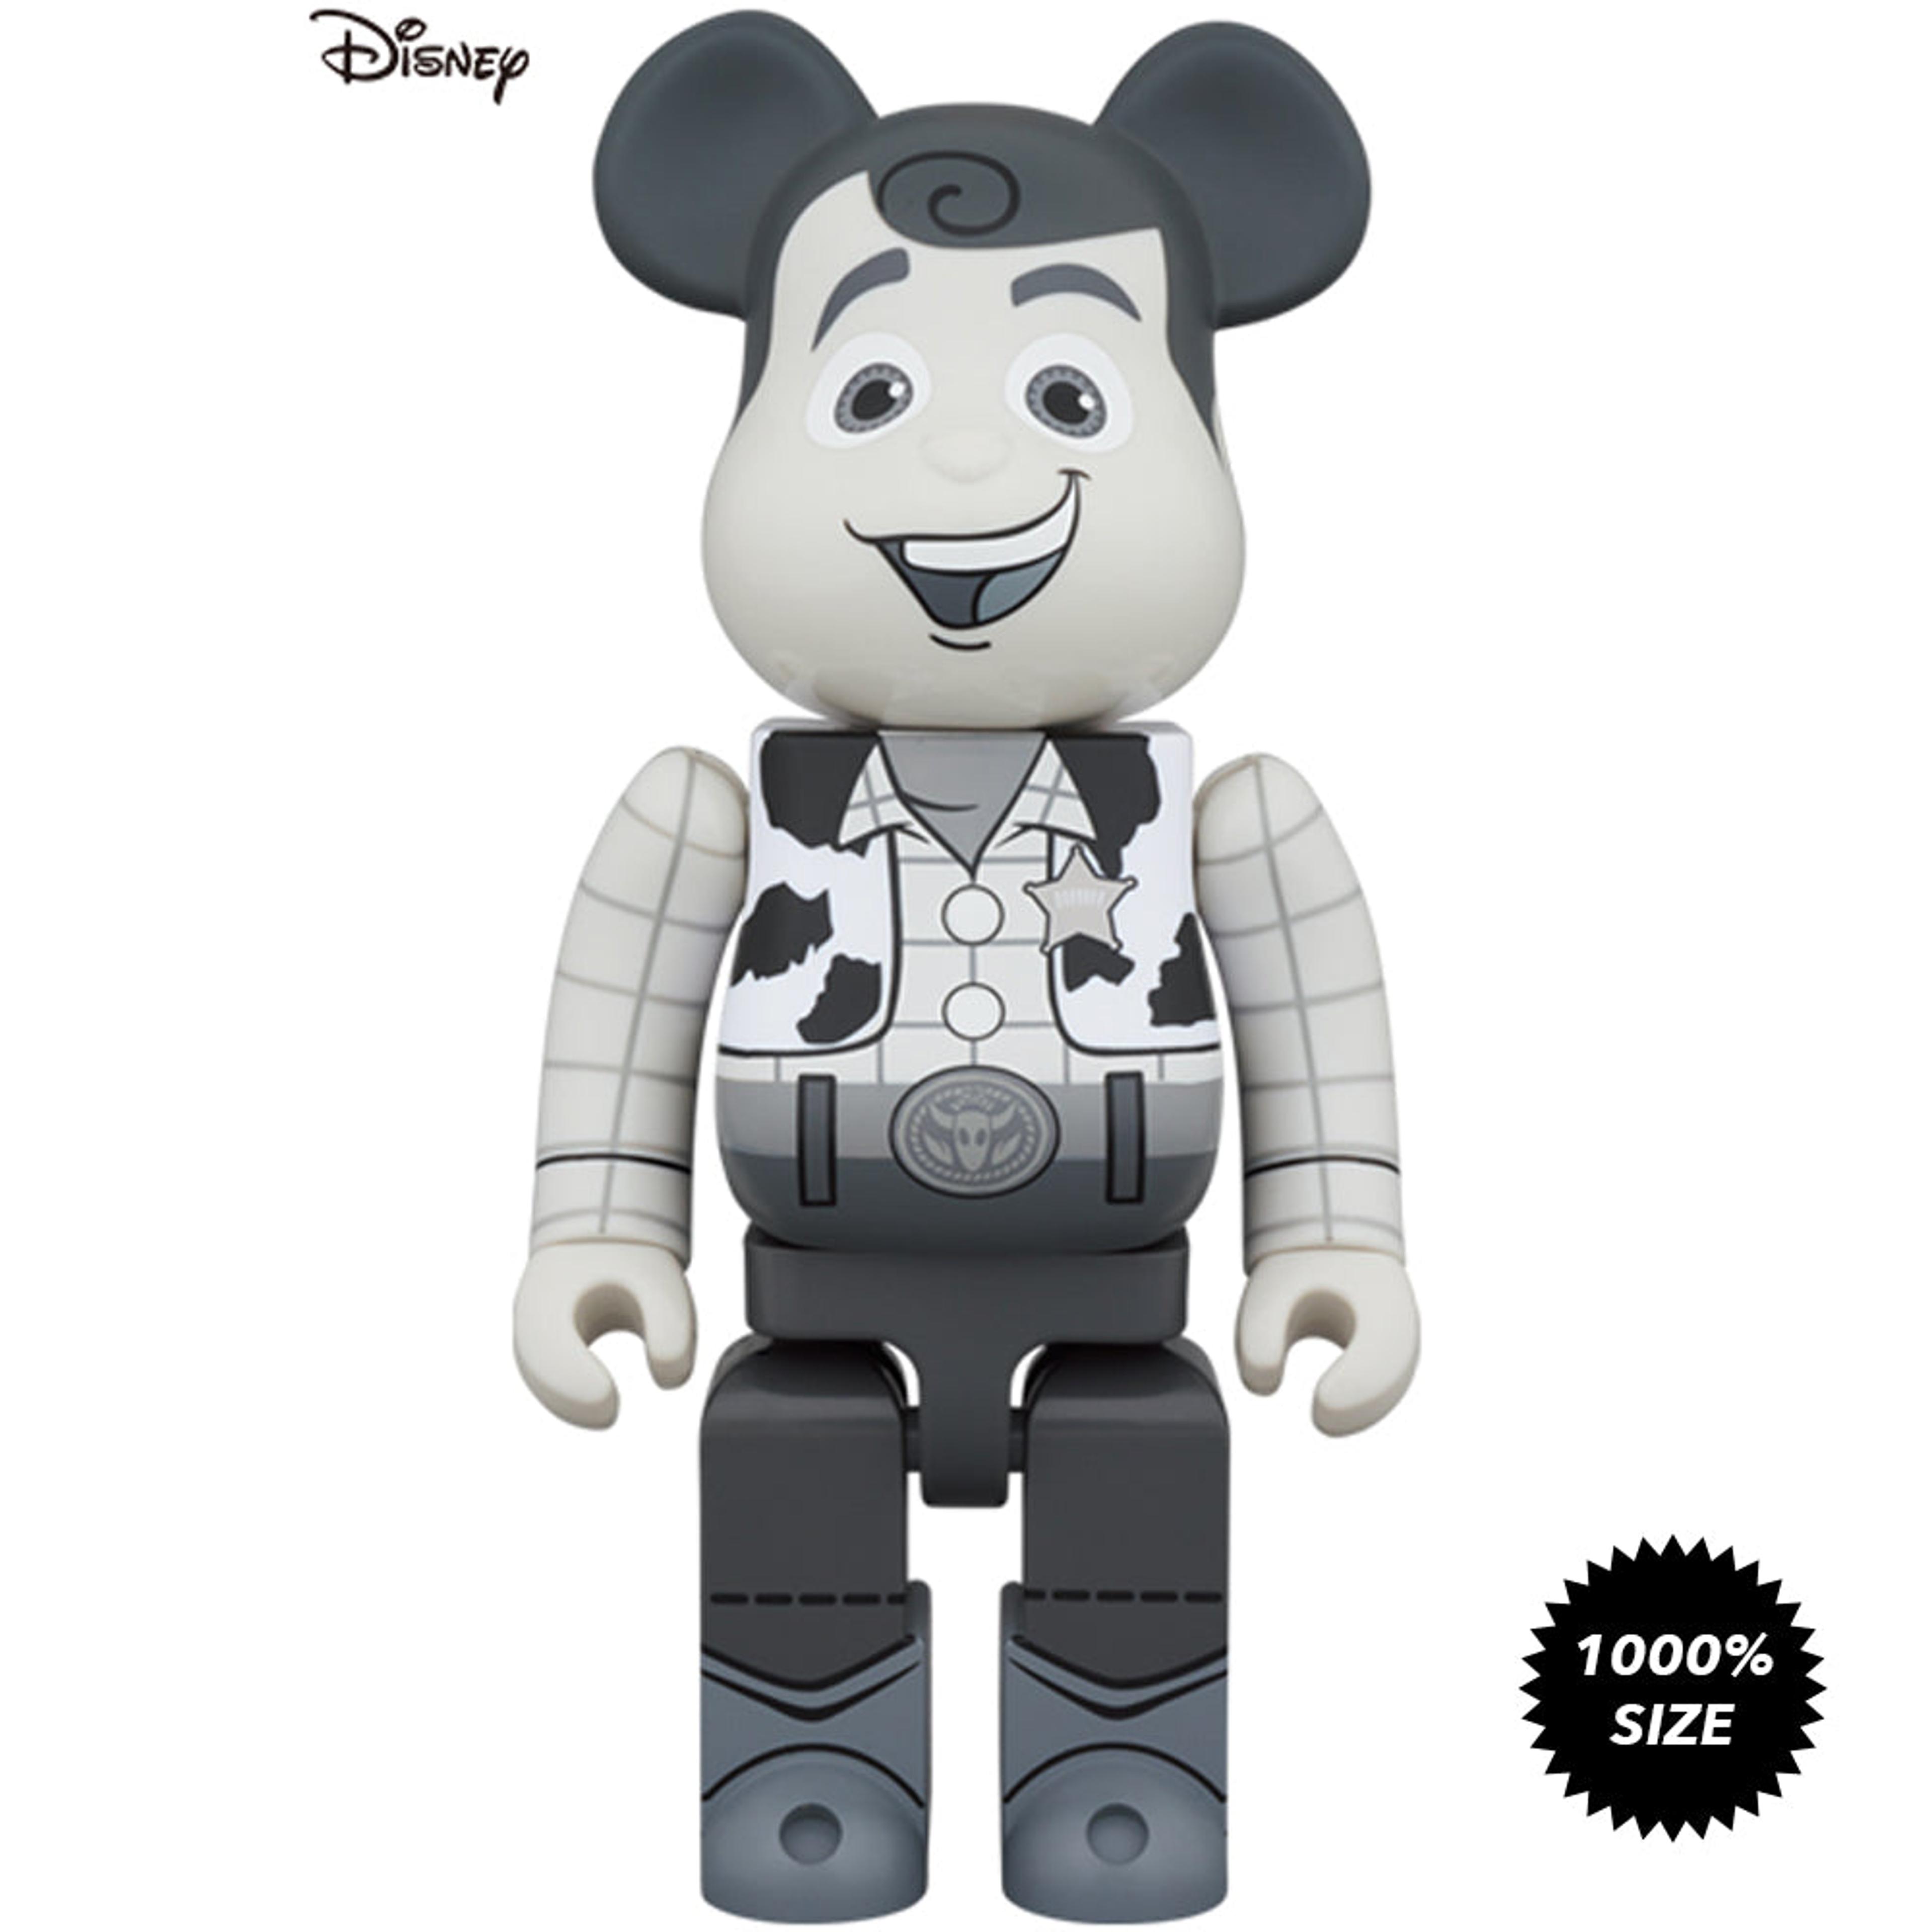 Toy Story Woody (Black and White Version) 1000% Bearbrick by Med